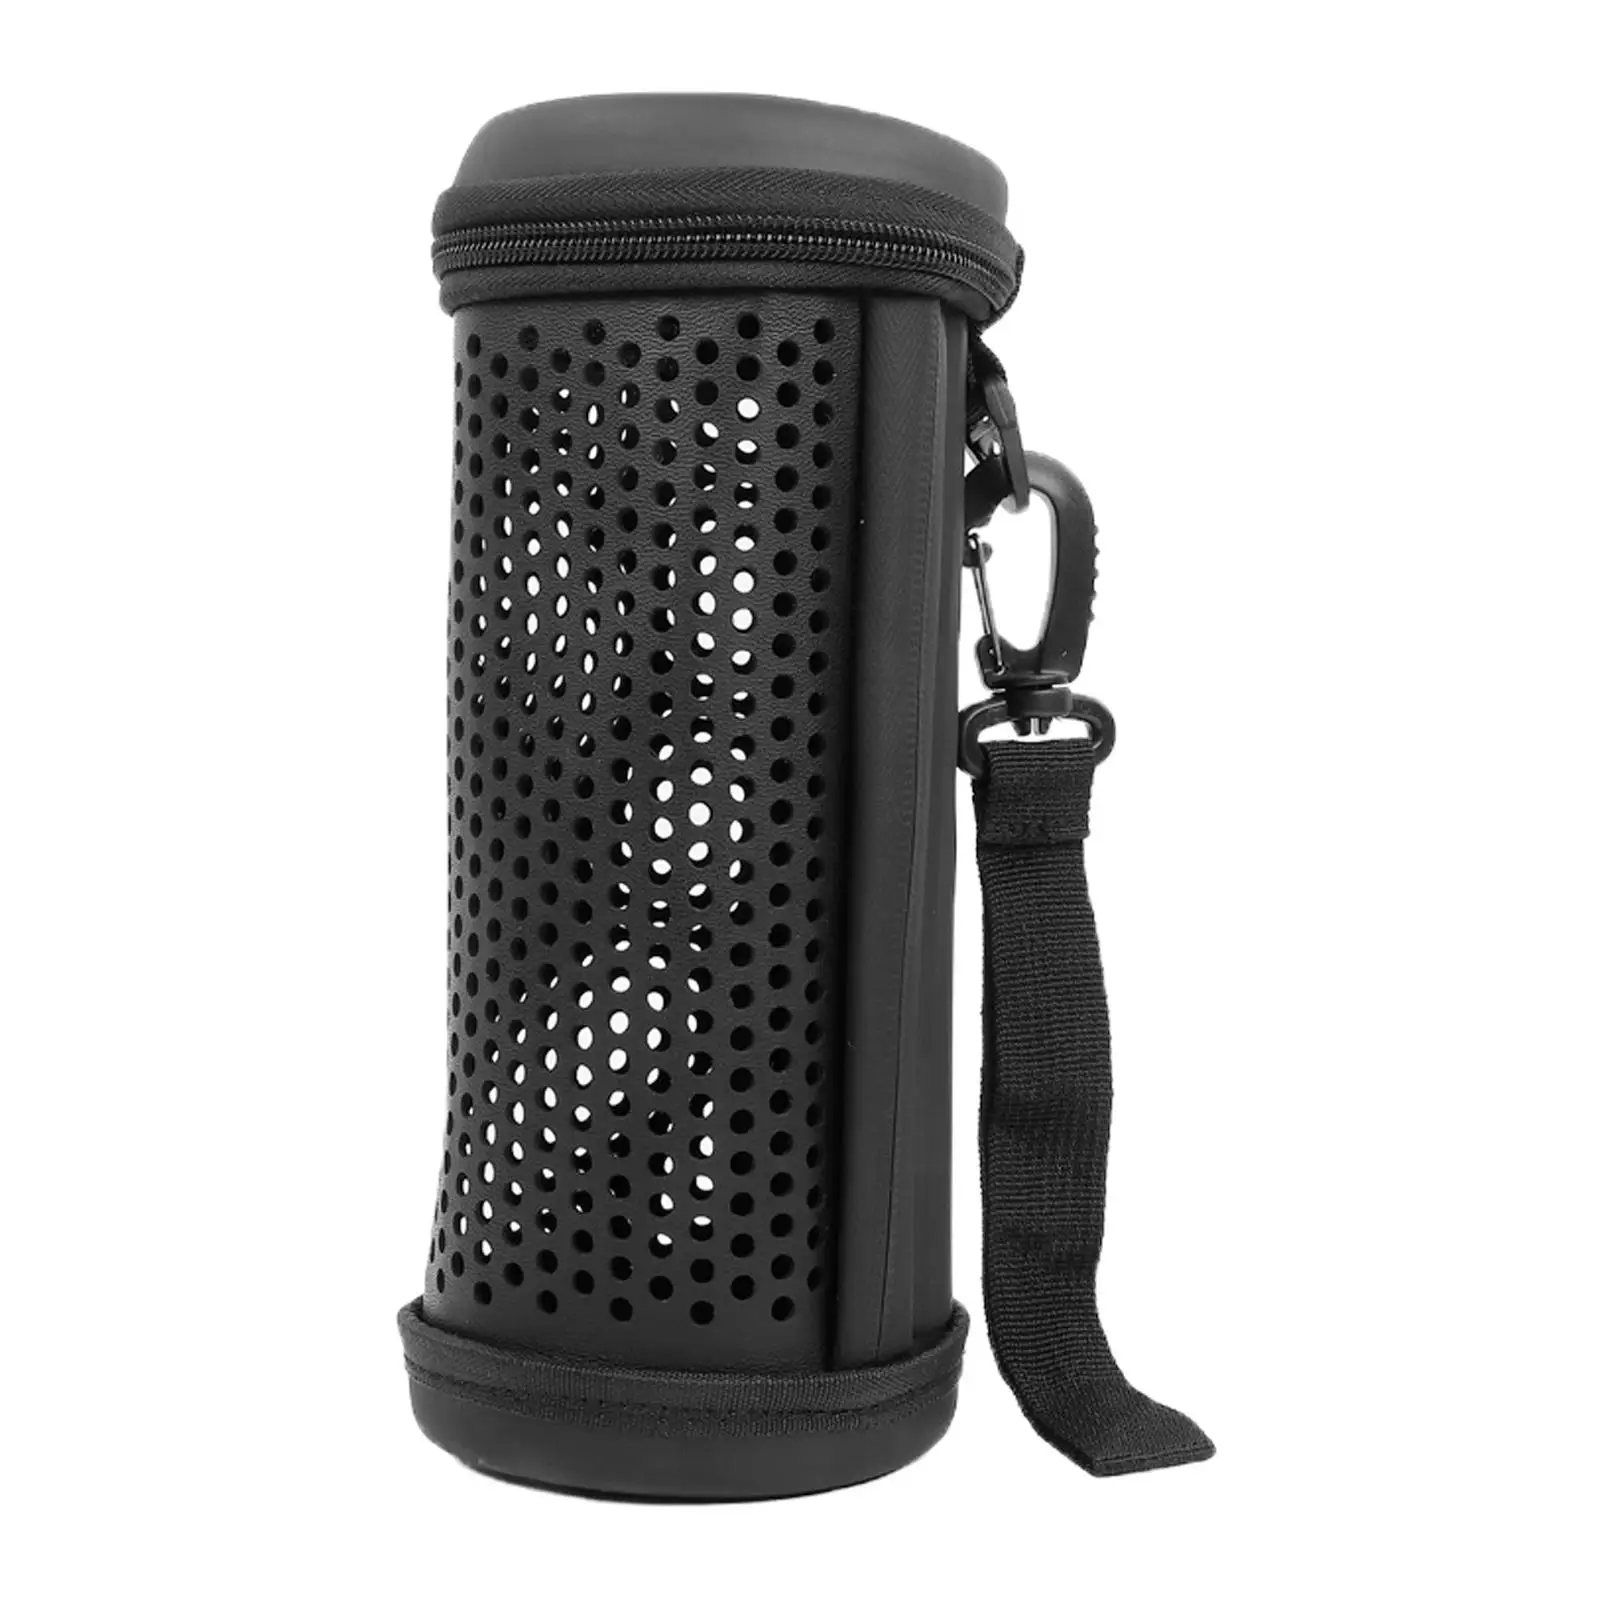 Hollowed Bag with Carabiner Bluetooth Audio Speaker Protective Case Cover for UE Megaboom 3